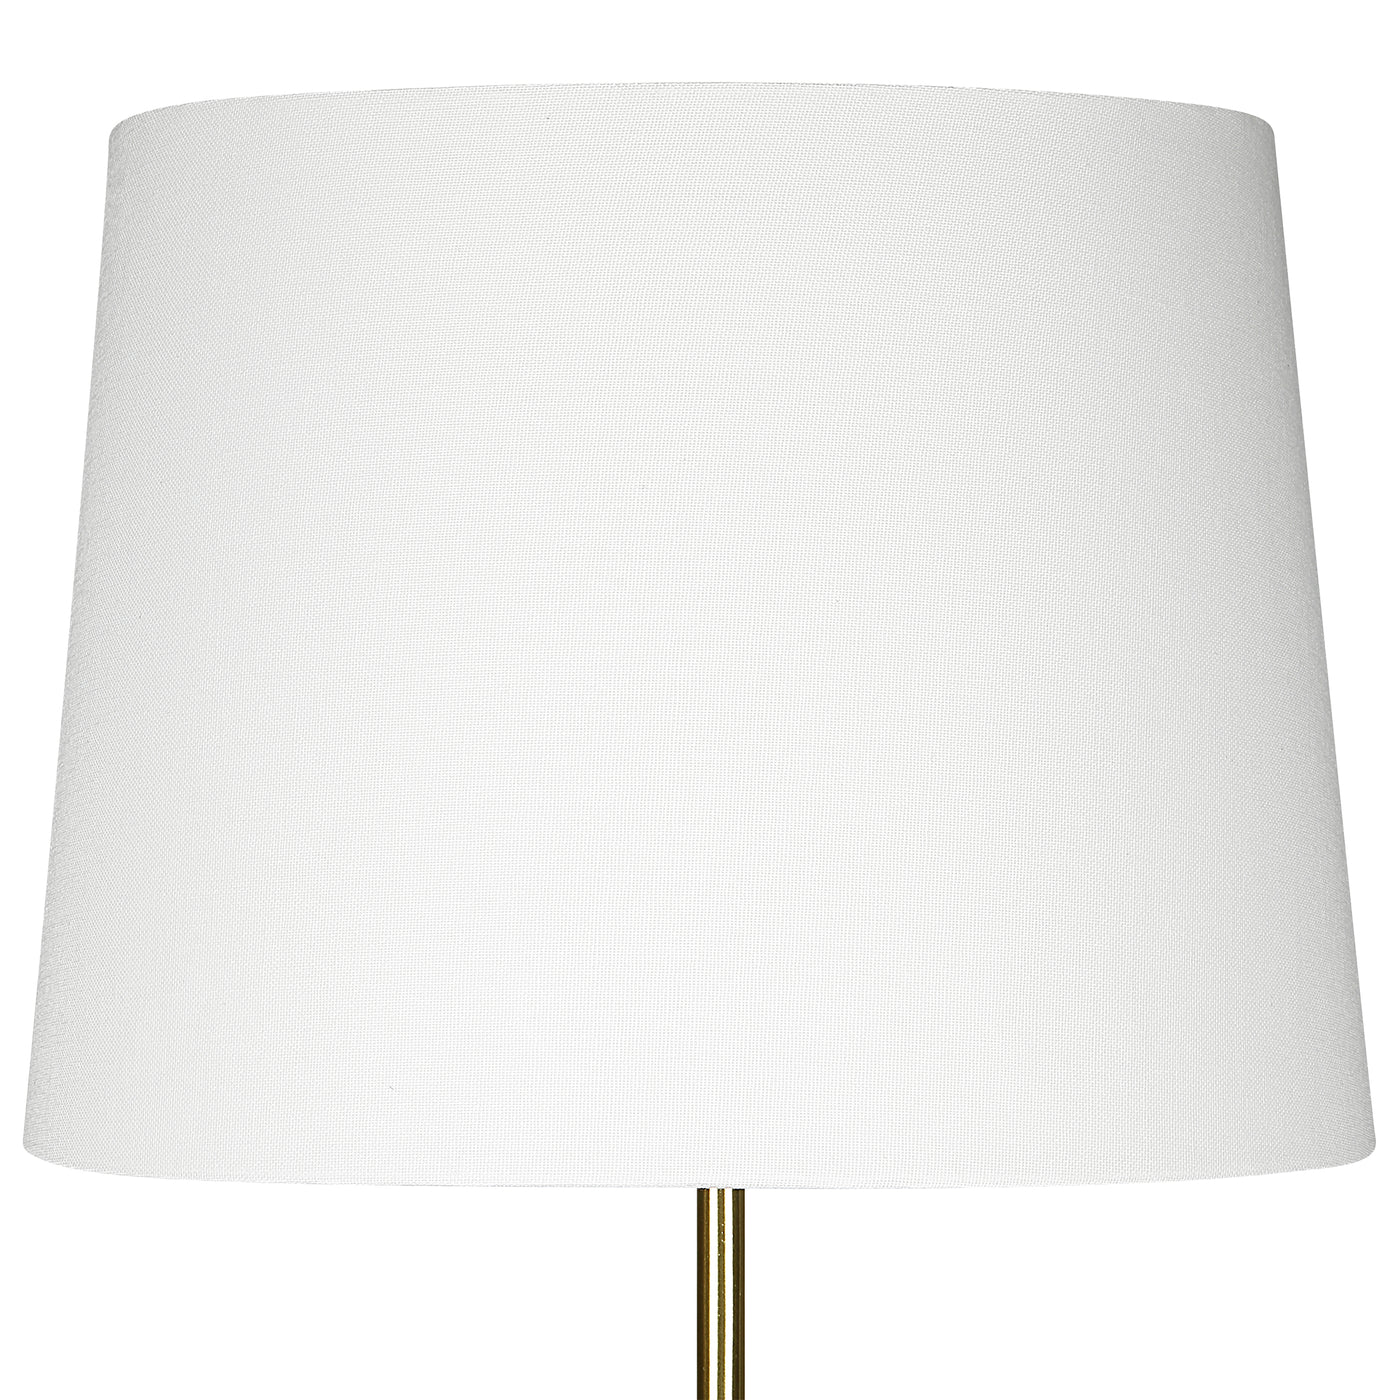 The Cancun - Table Lamp with White Ceramic Base